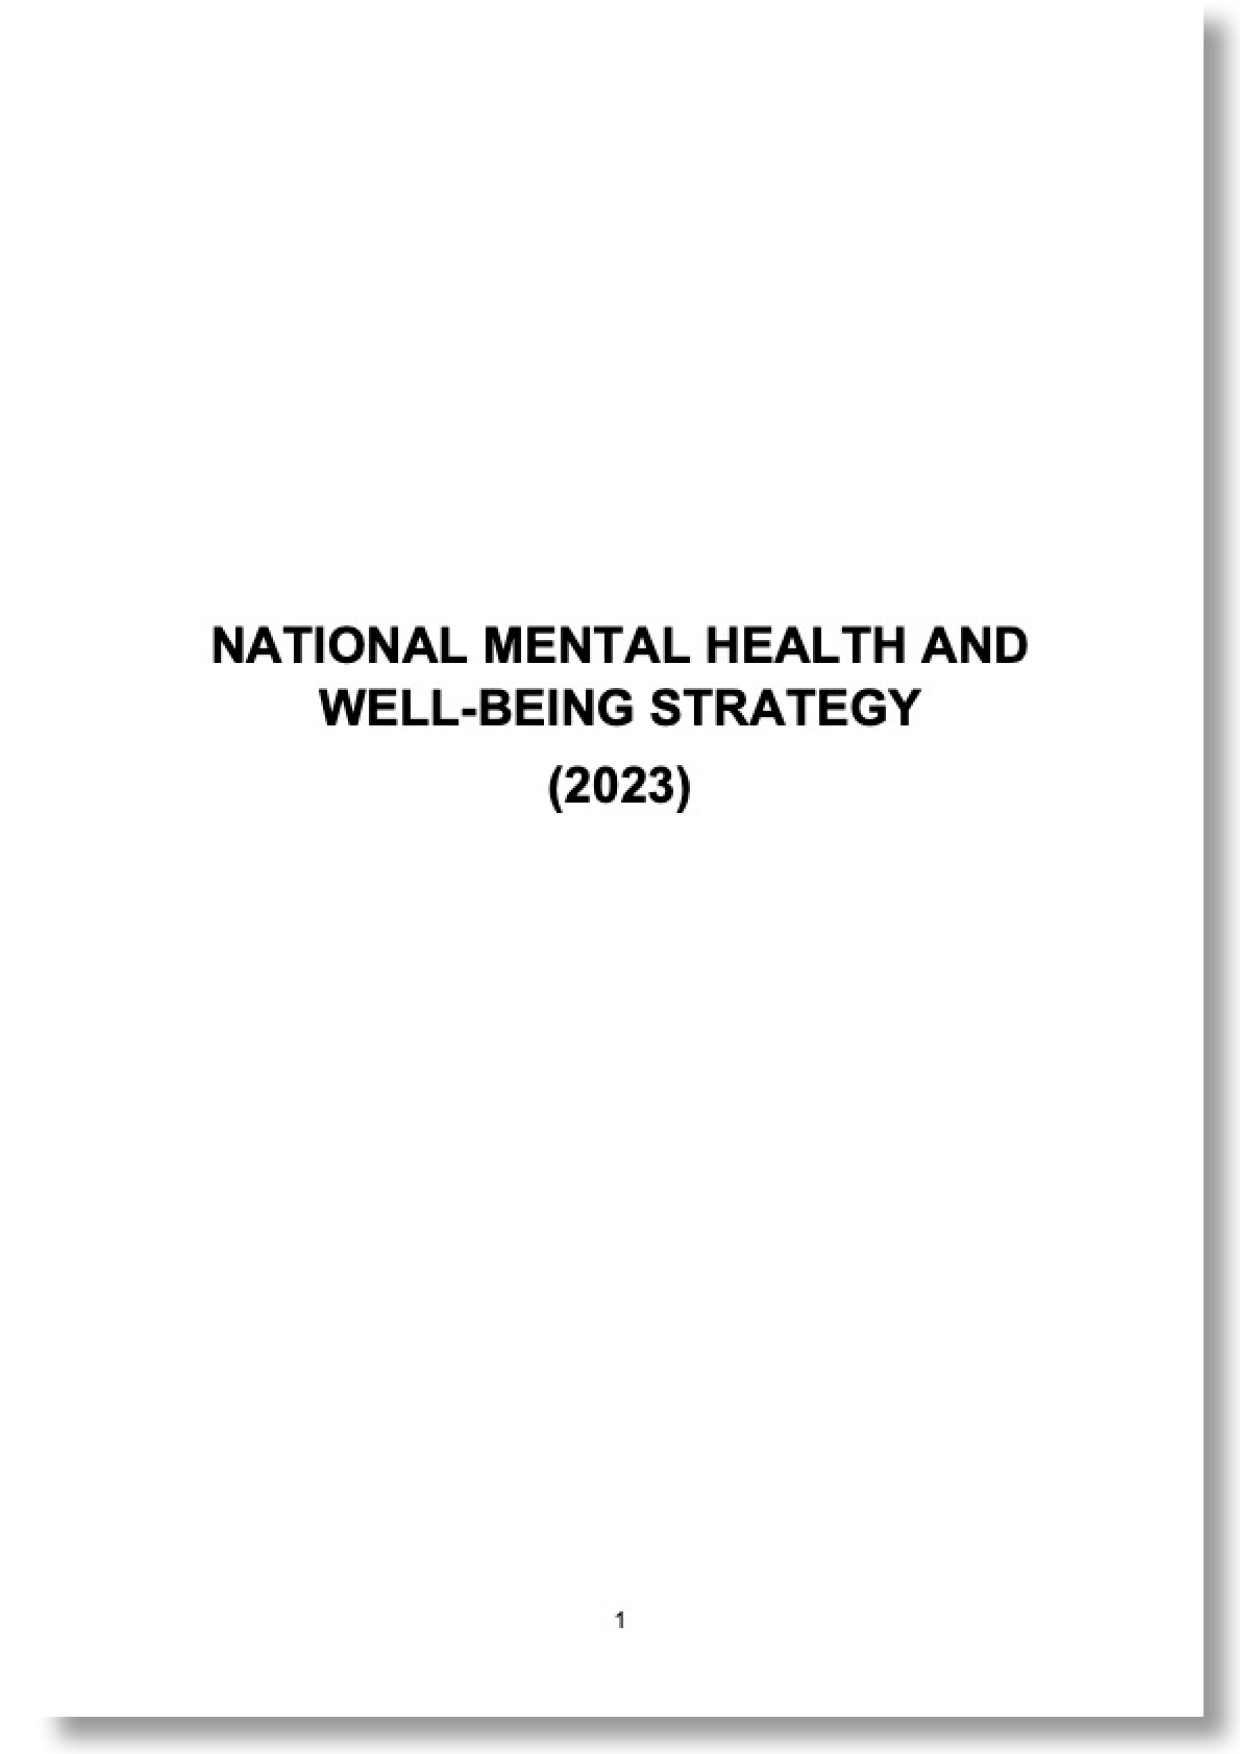 NATIONAL MENTAL HEALTH AND WELL-BEING STRATEGY (2023)